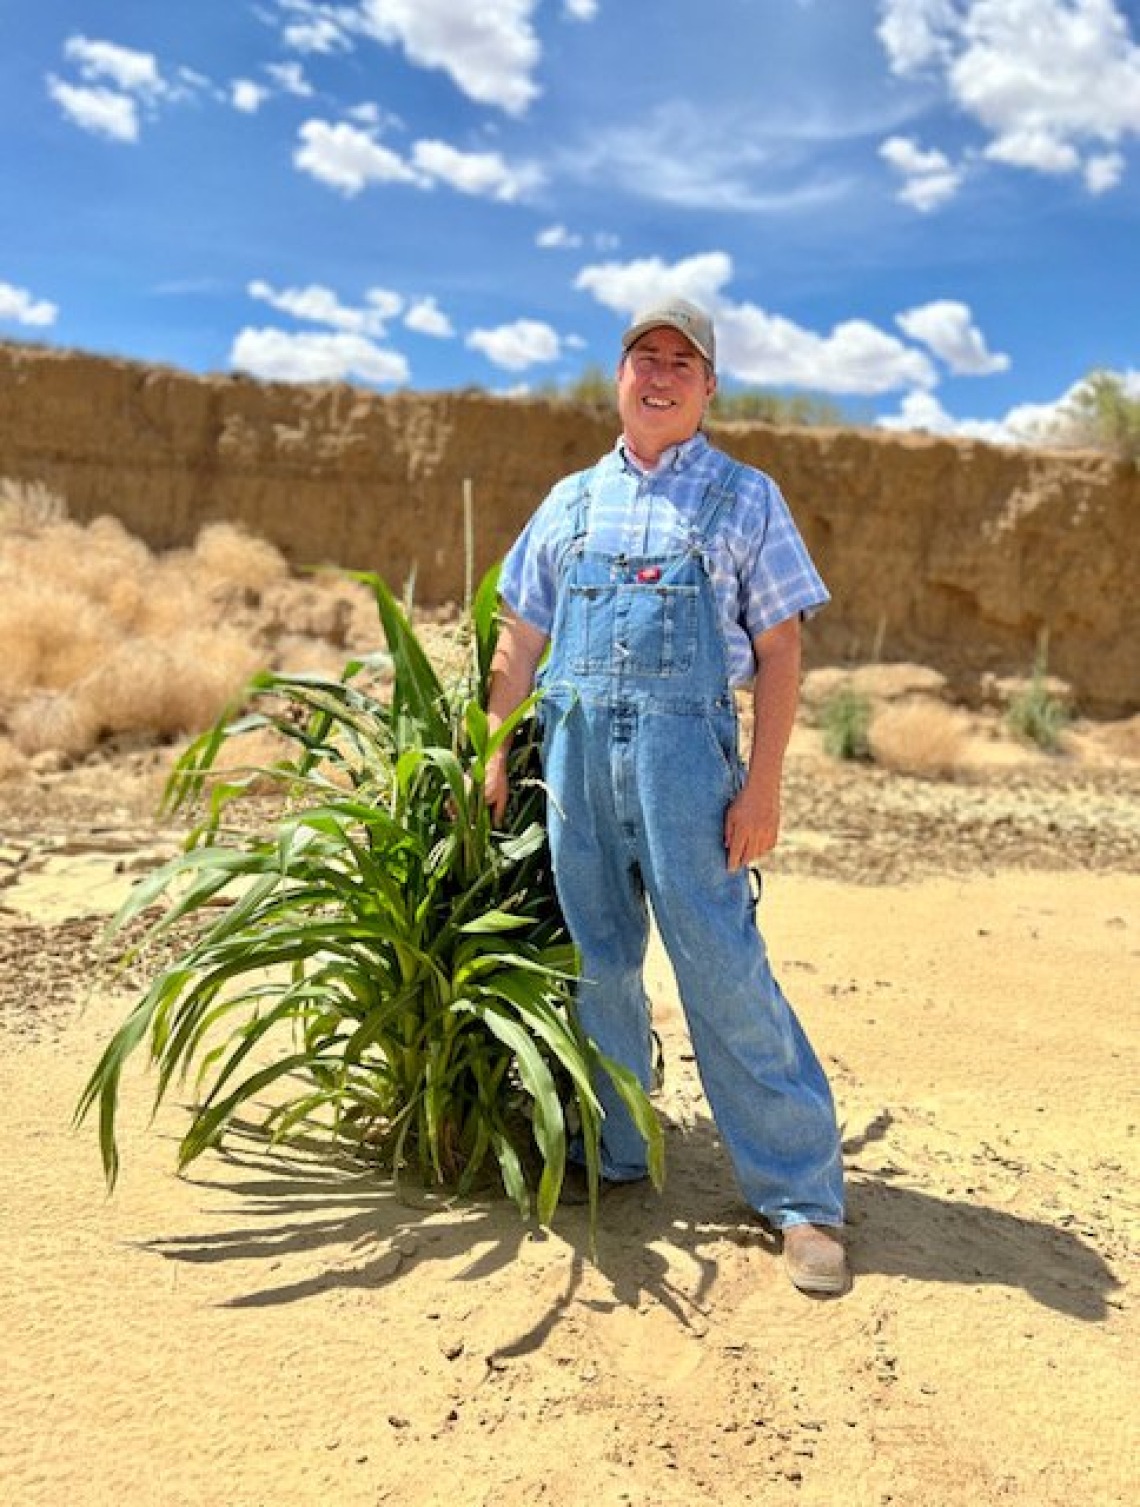 Dr. Michael Kototuwa Johnson is a Hopi descendant and practitioner of Native American land practices referred to as dryland farming, a tradition of his people for over two millennia.